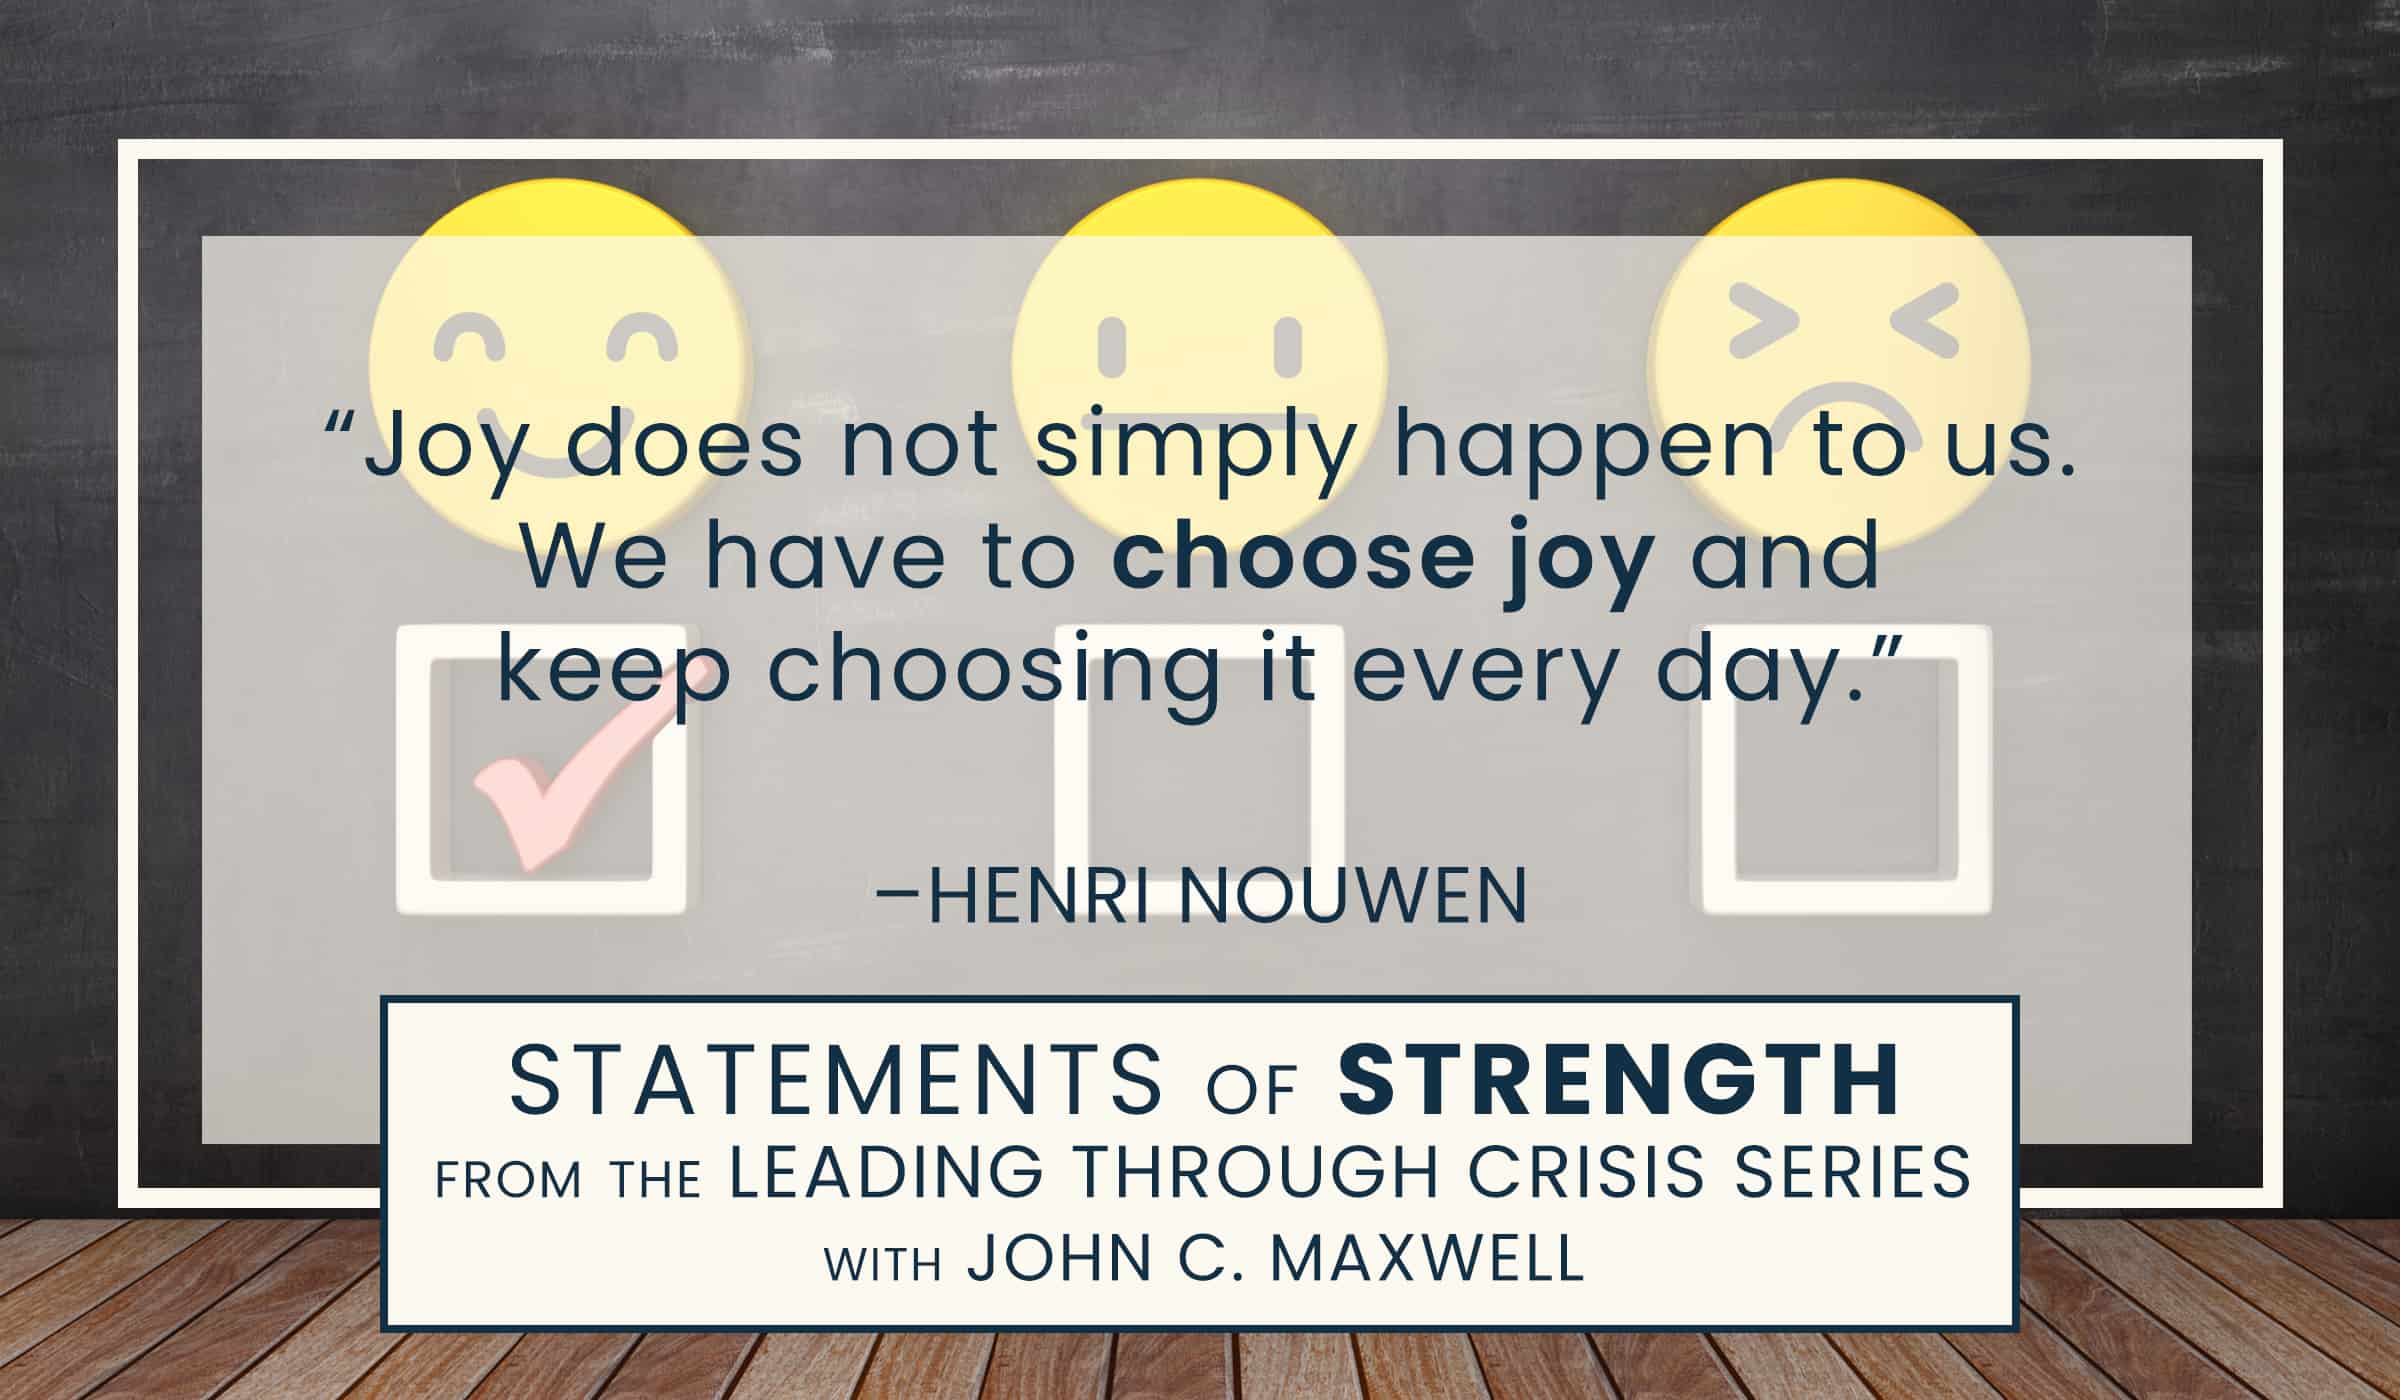 image of quote pic with quotation by henri nouwen